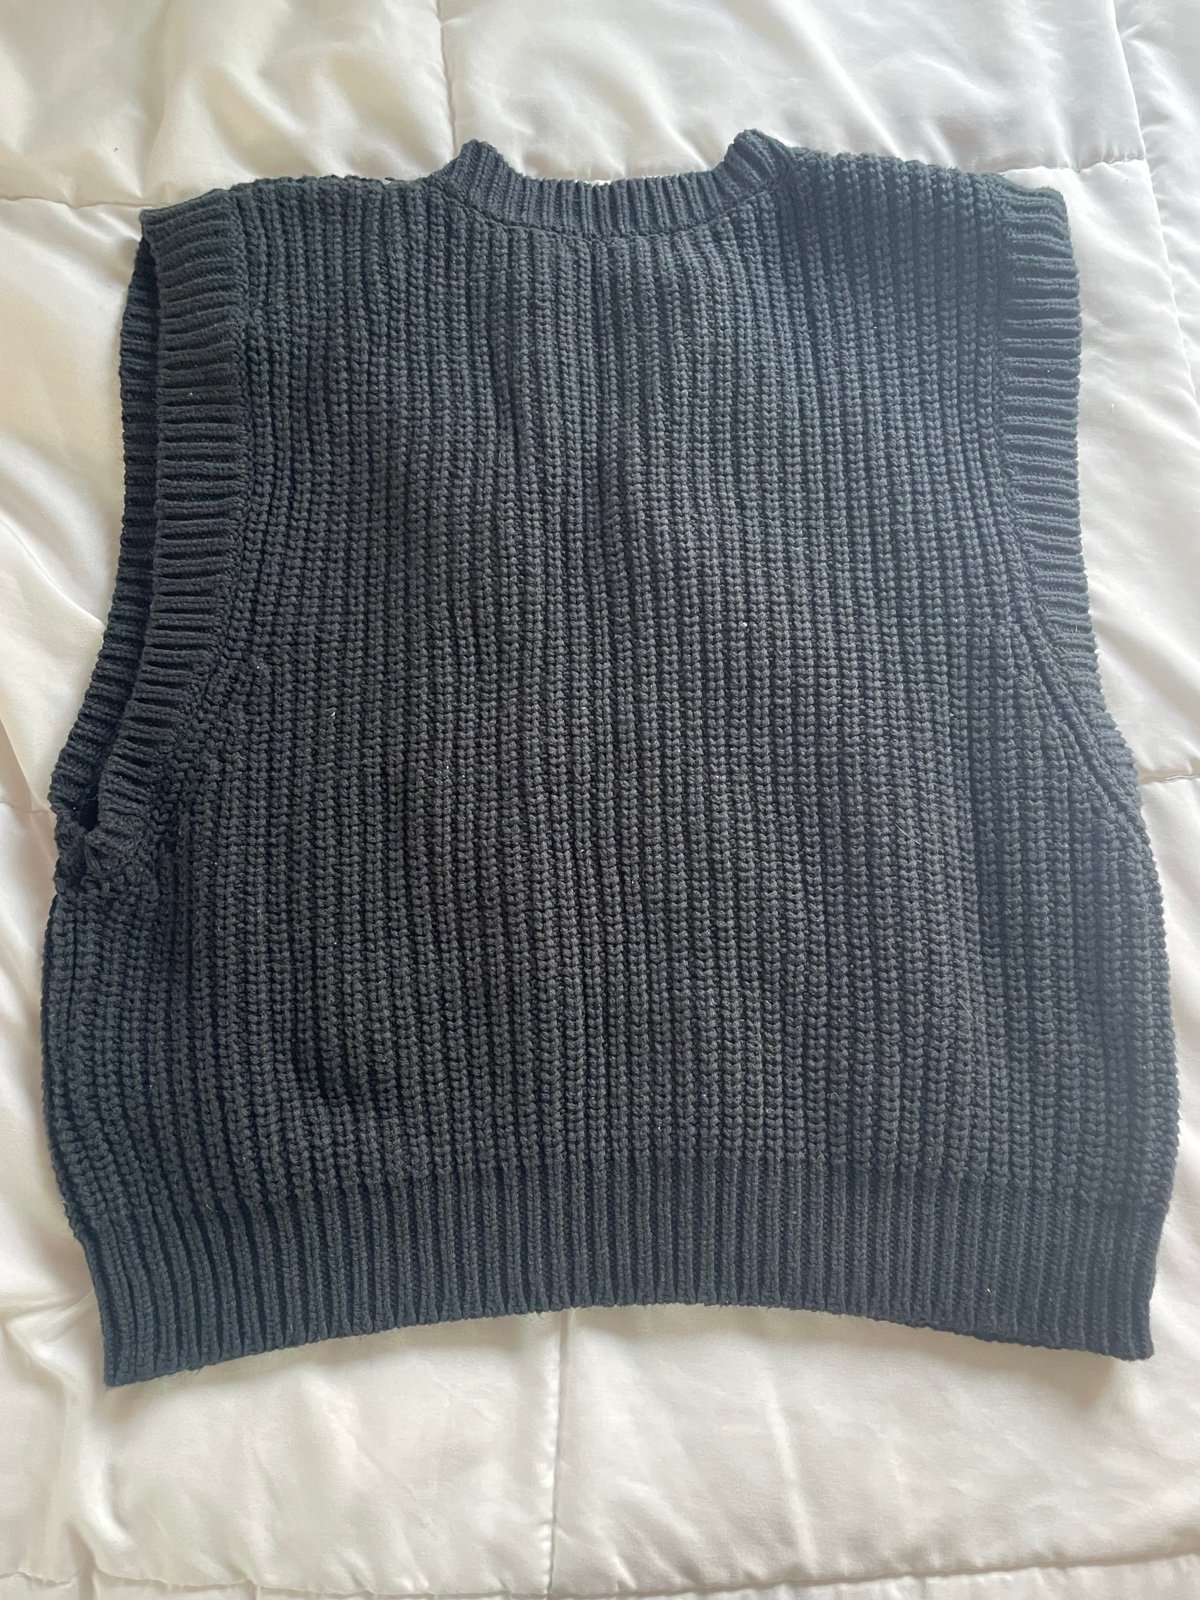 save up to 70% Black Knitted Sweater Vest | Forever 21 Lk78nwZ12 Everyday Low Prices